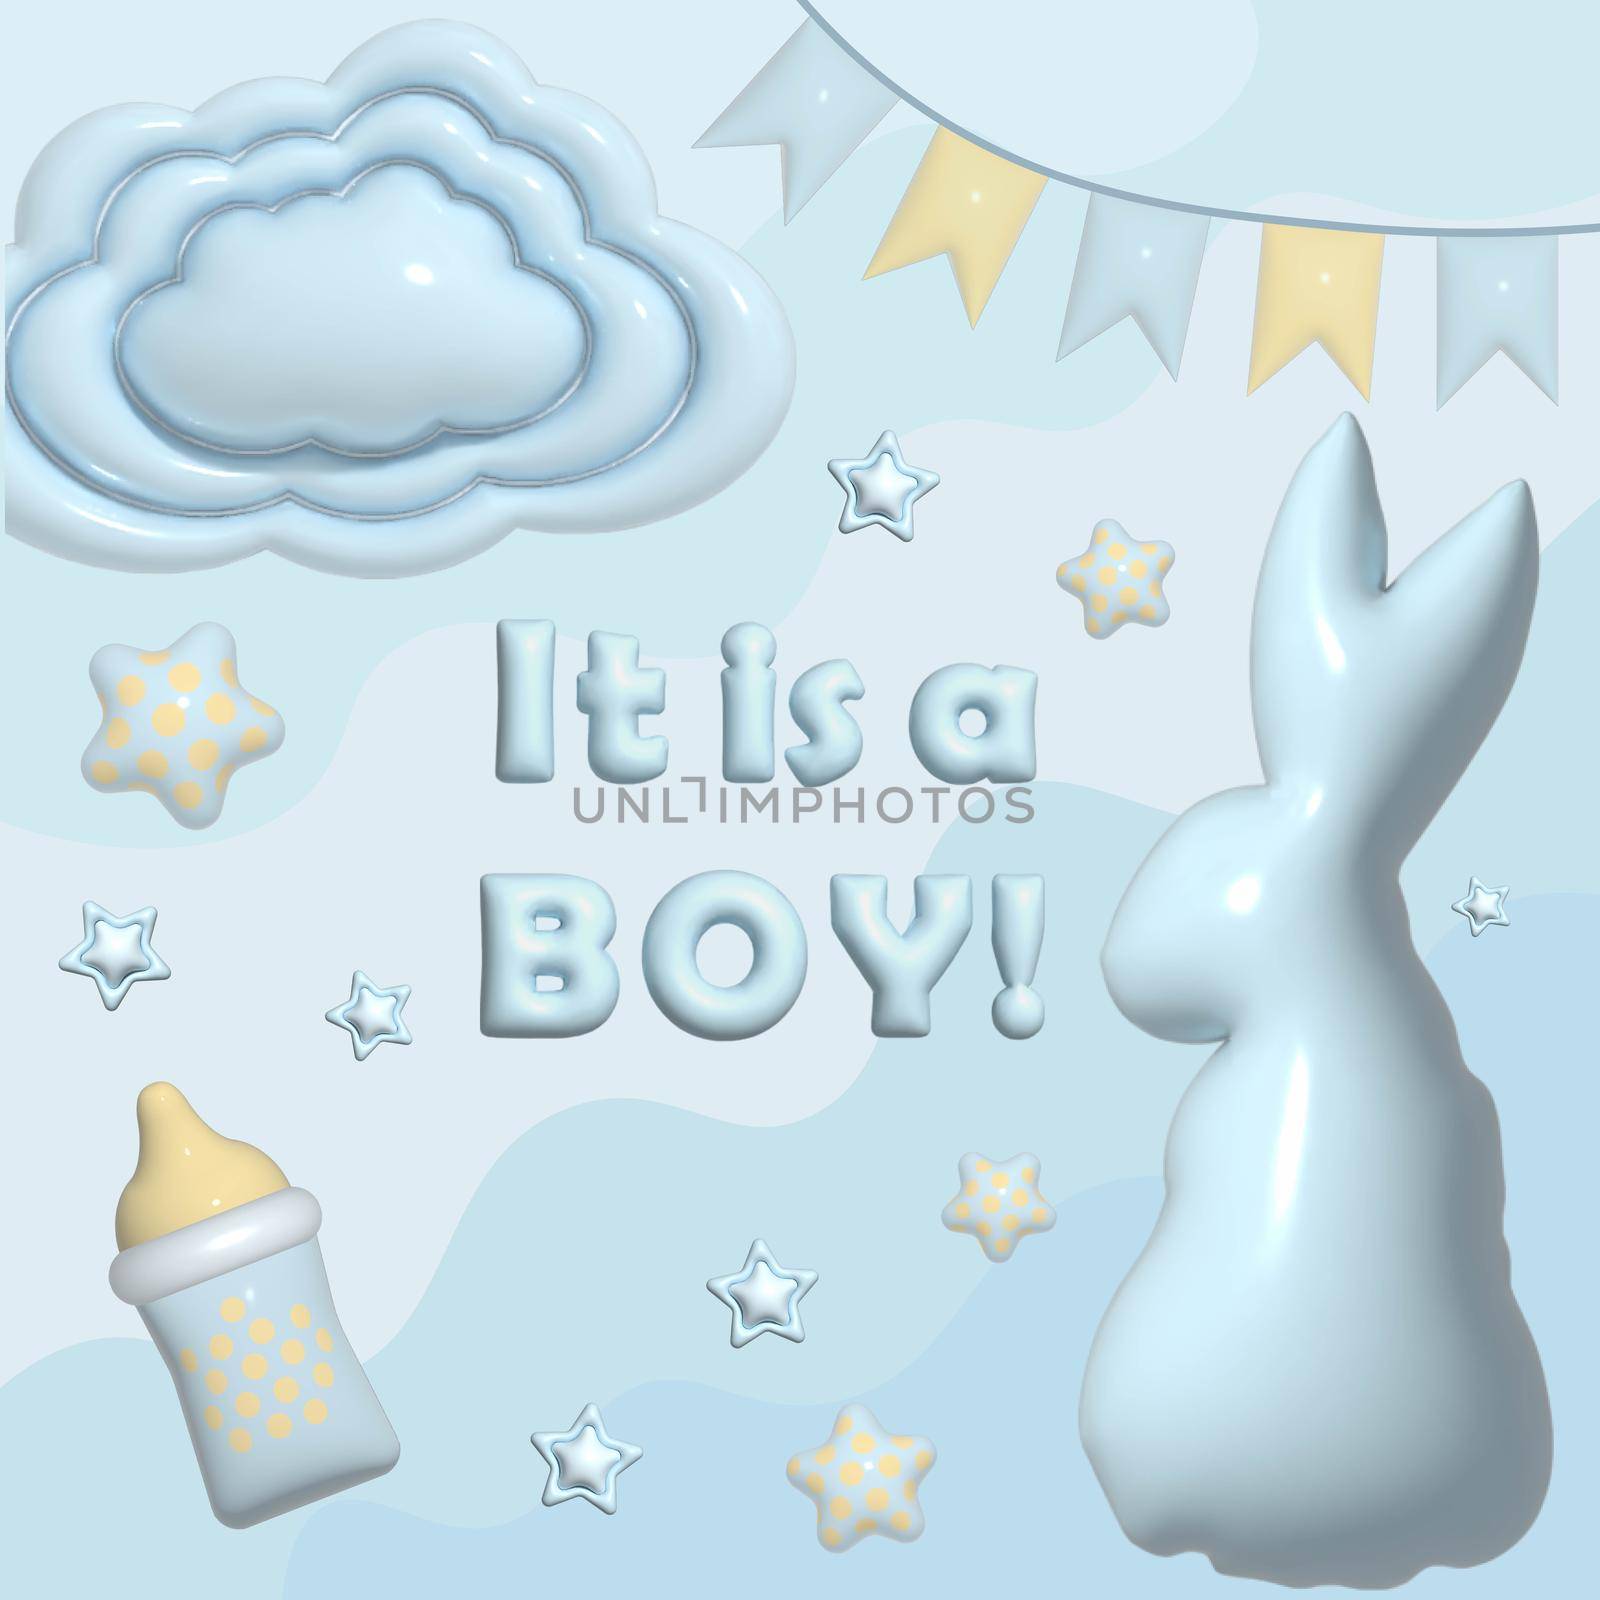 It's a boy. Festive poster for baby shower parties. Blue background